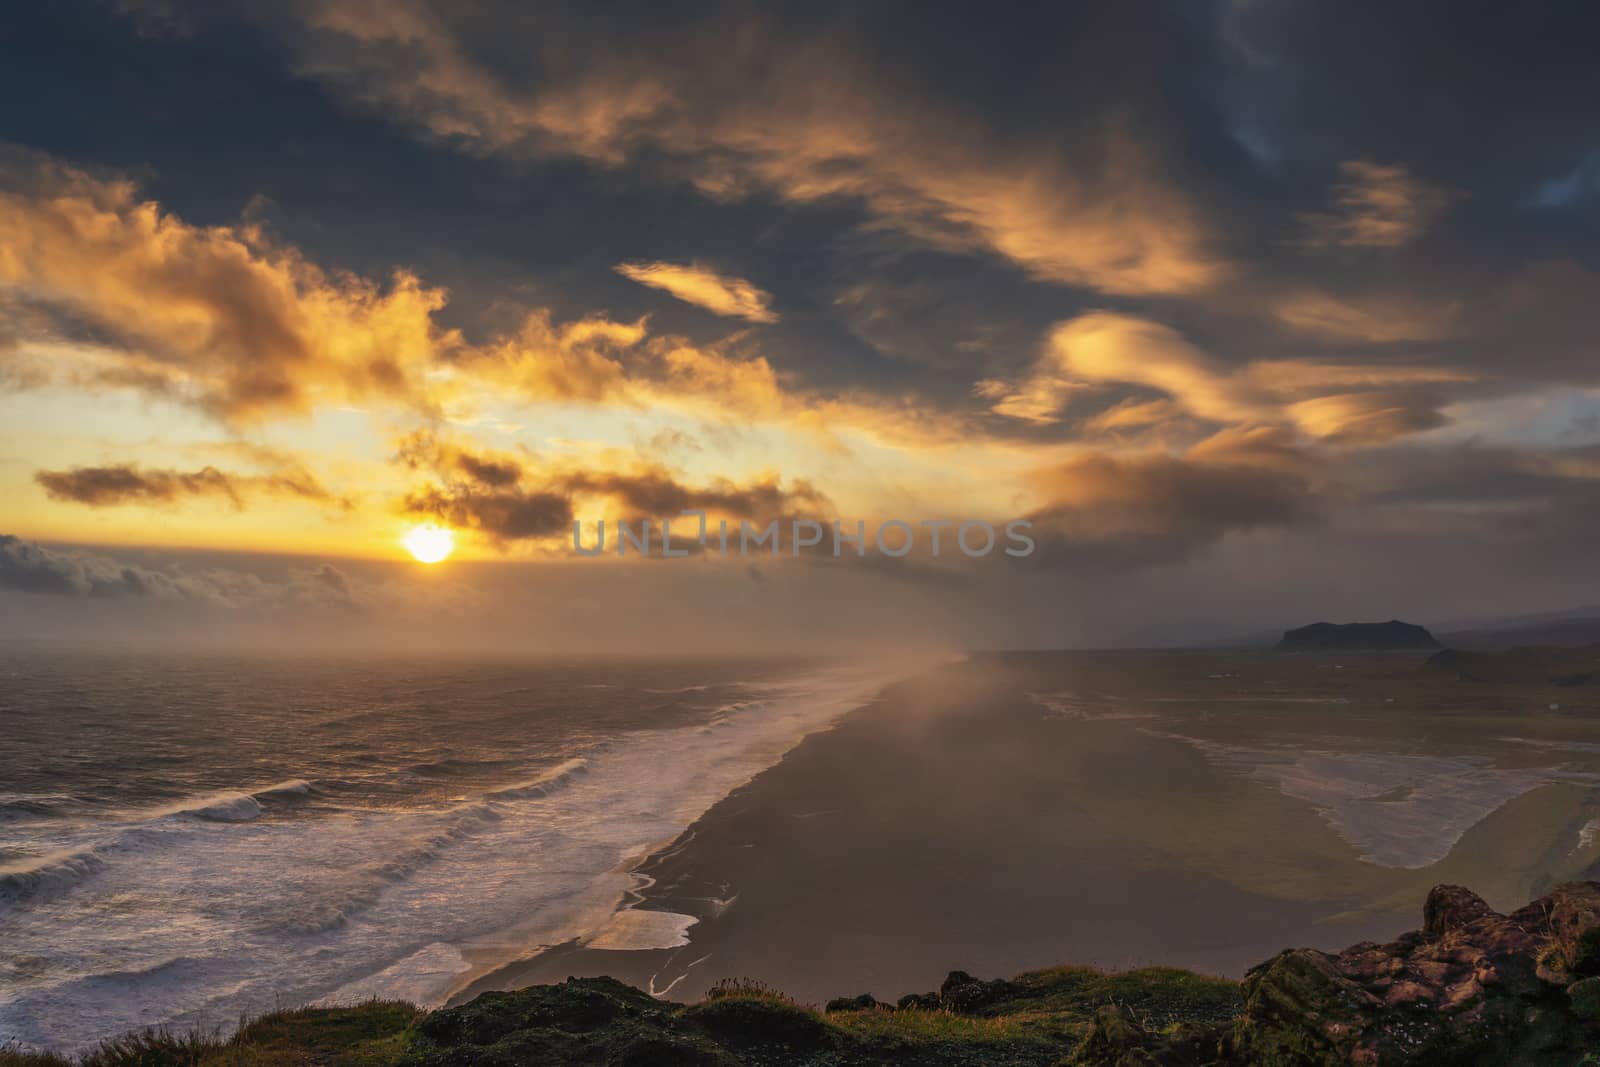 Dramatic sunset above a black beach viewed from Dyrholaey viewpoint in Iceland by nickfox